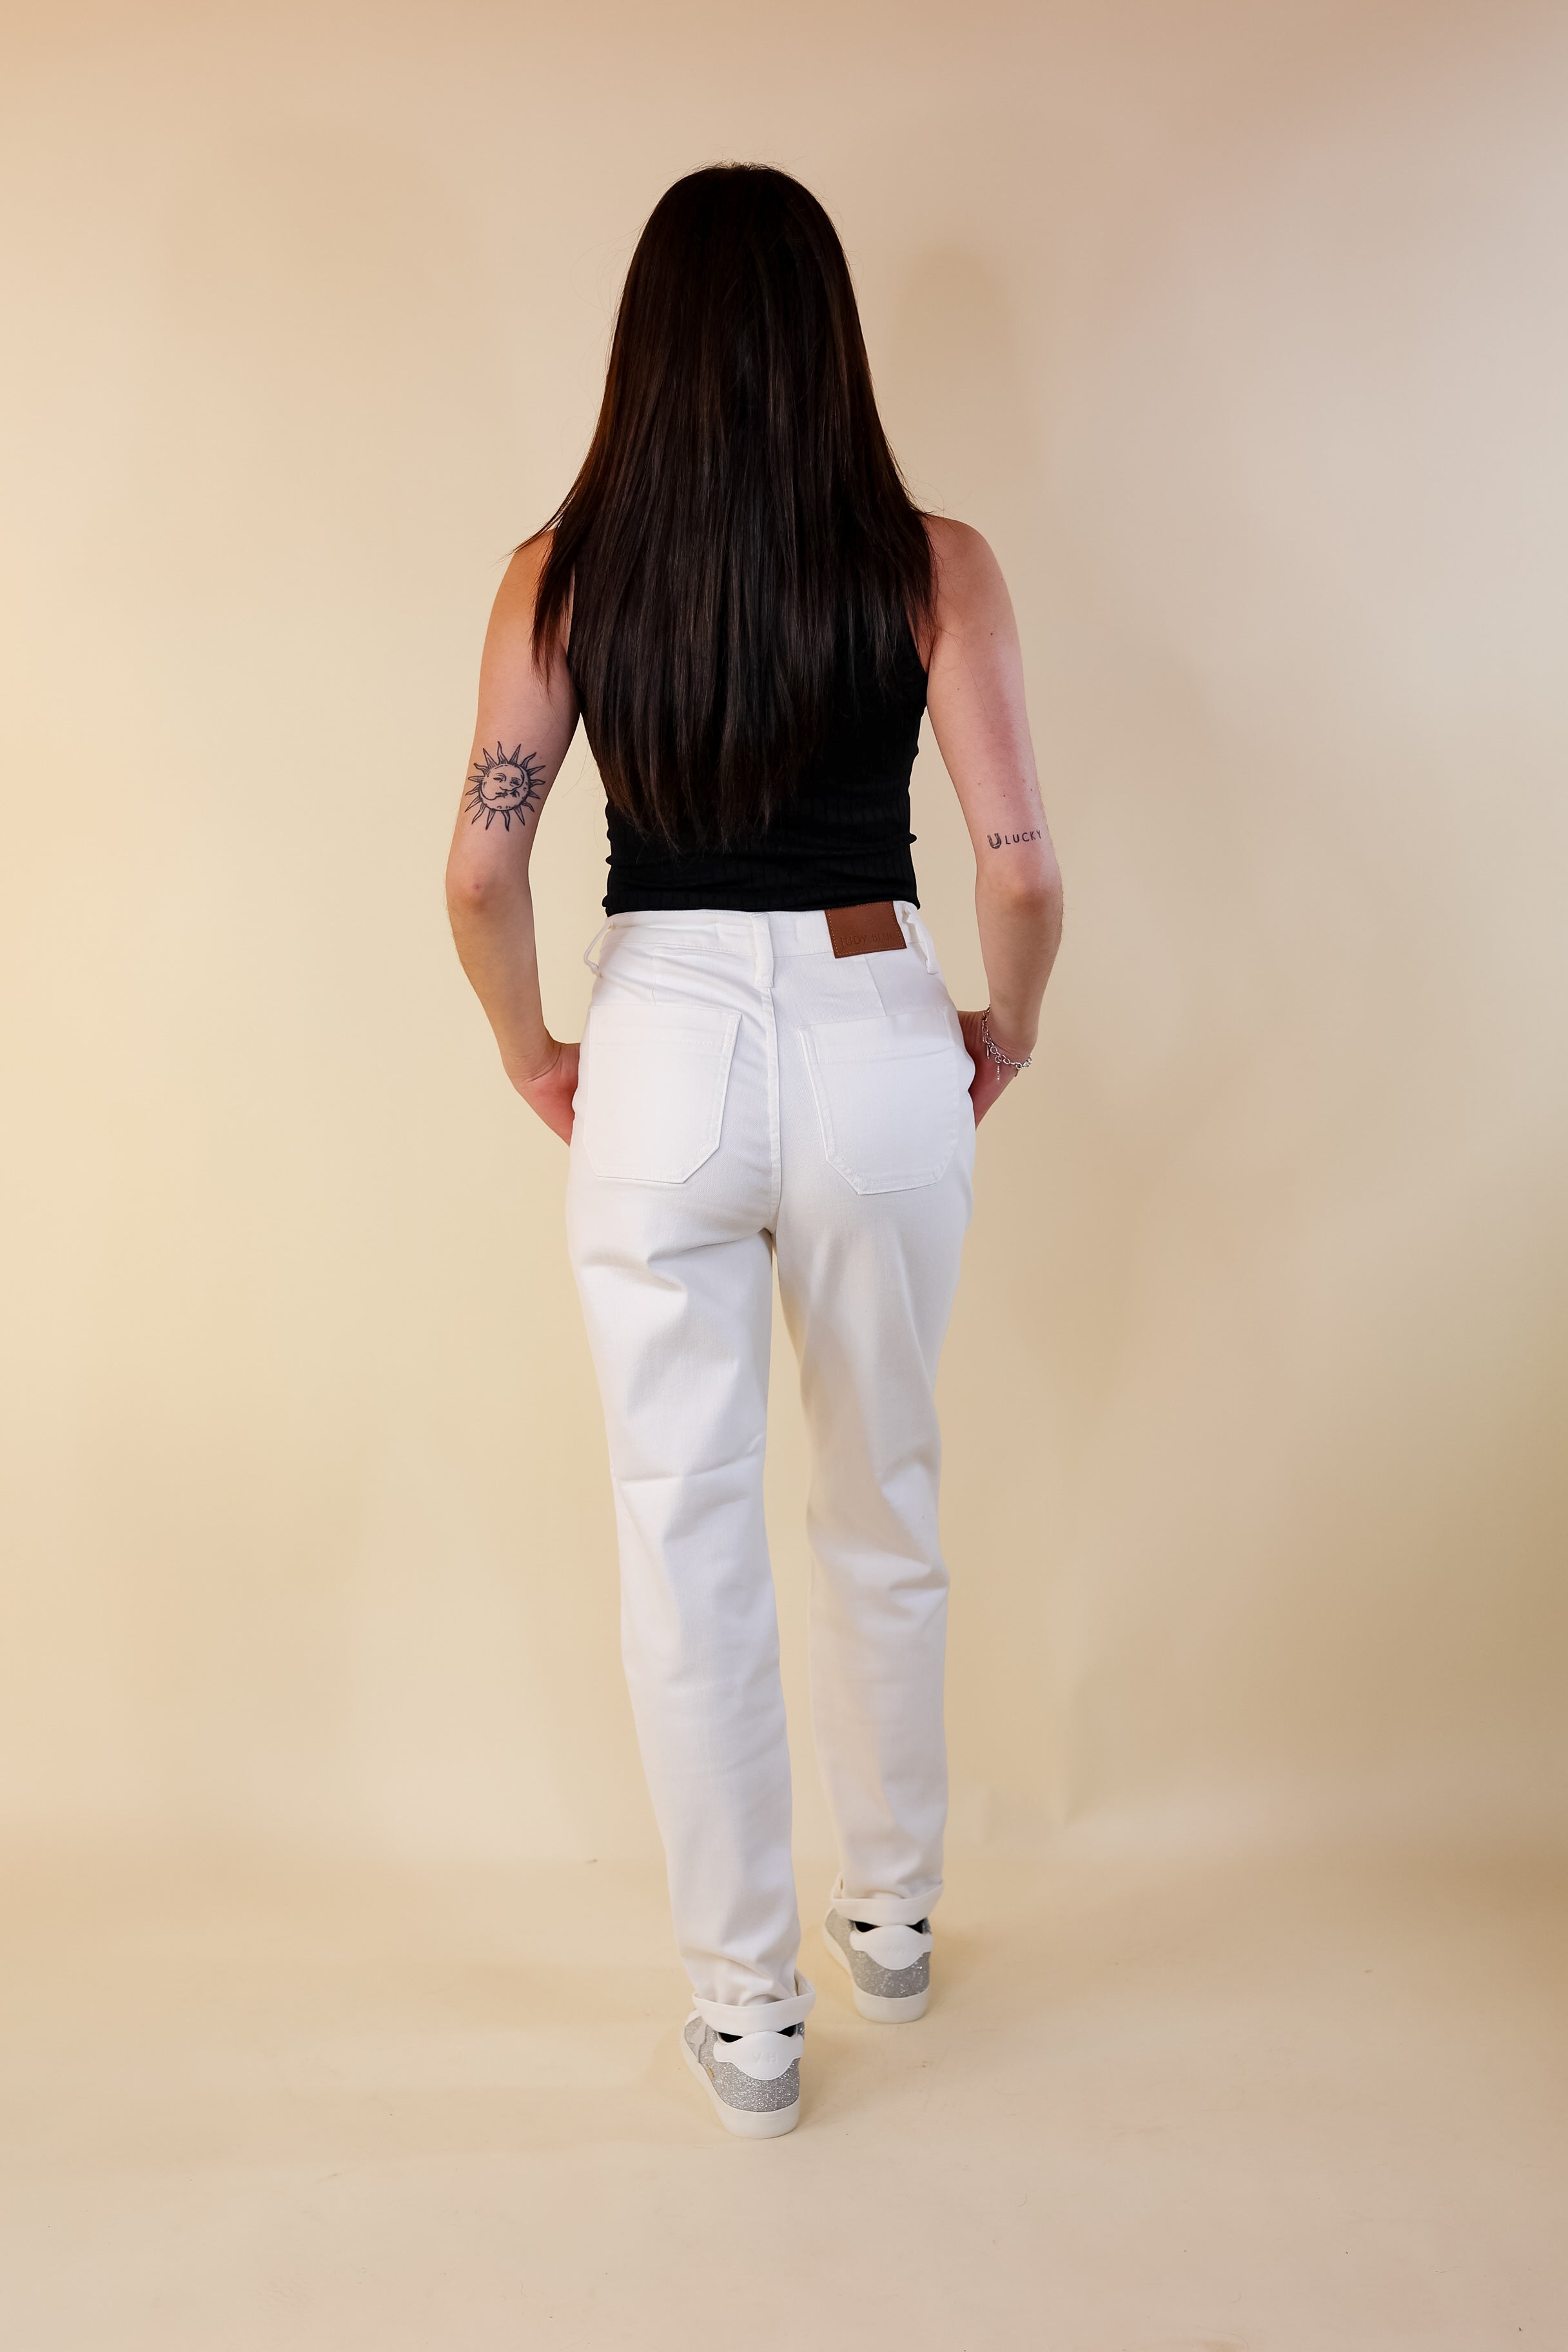 Judy Blue | Keep It A Secret Relaxed Pull on Jean Joggers with Cuffed Hem in White Wash - Giddy Up Glamour Boutique